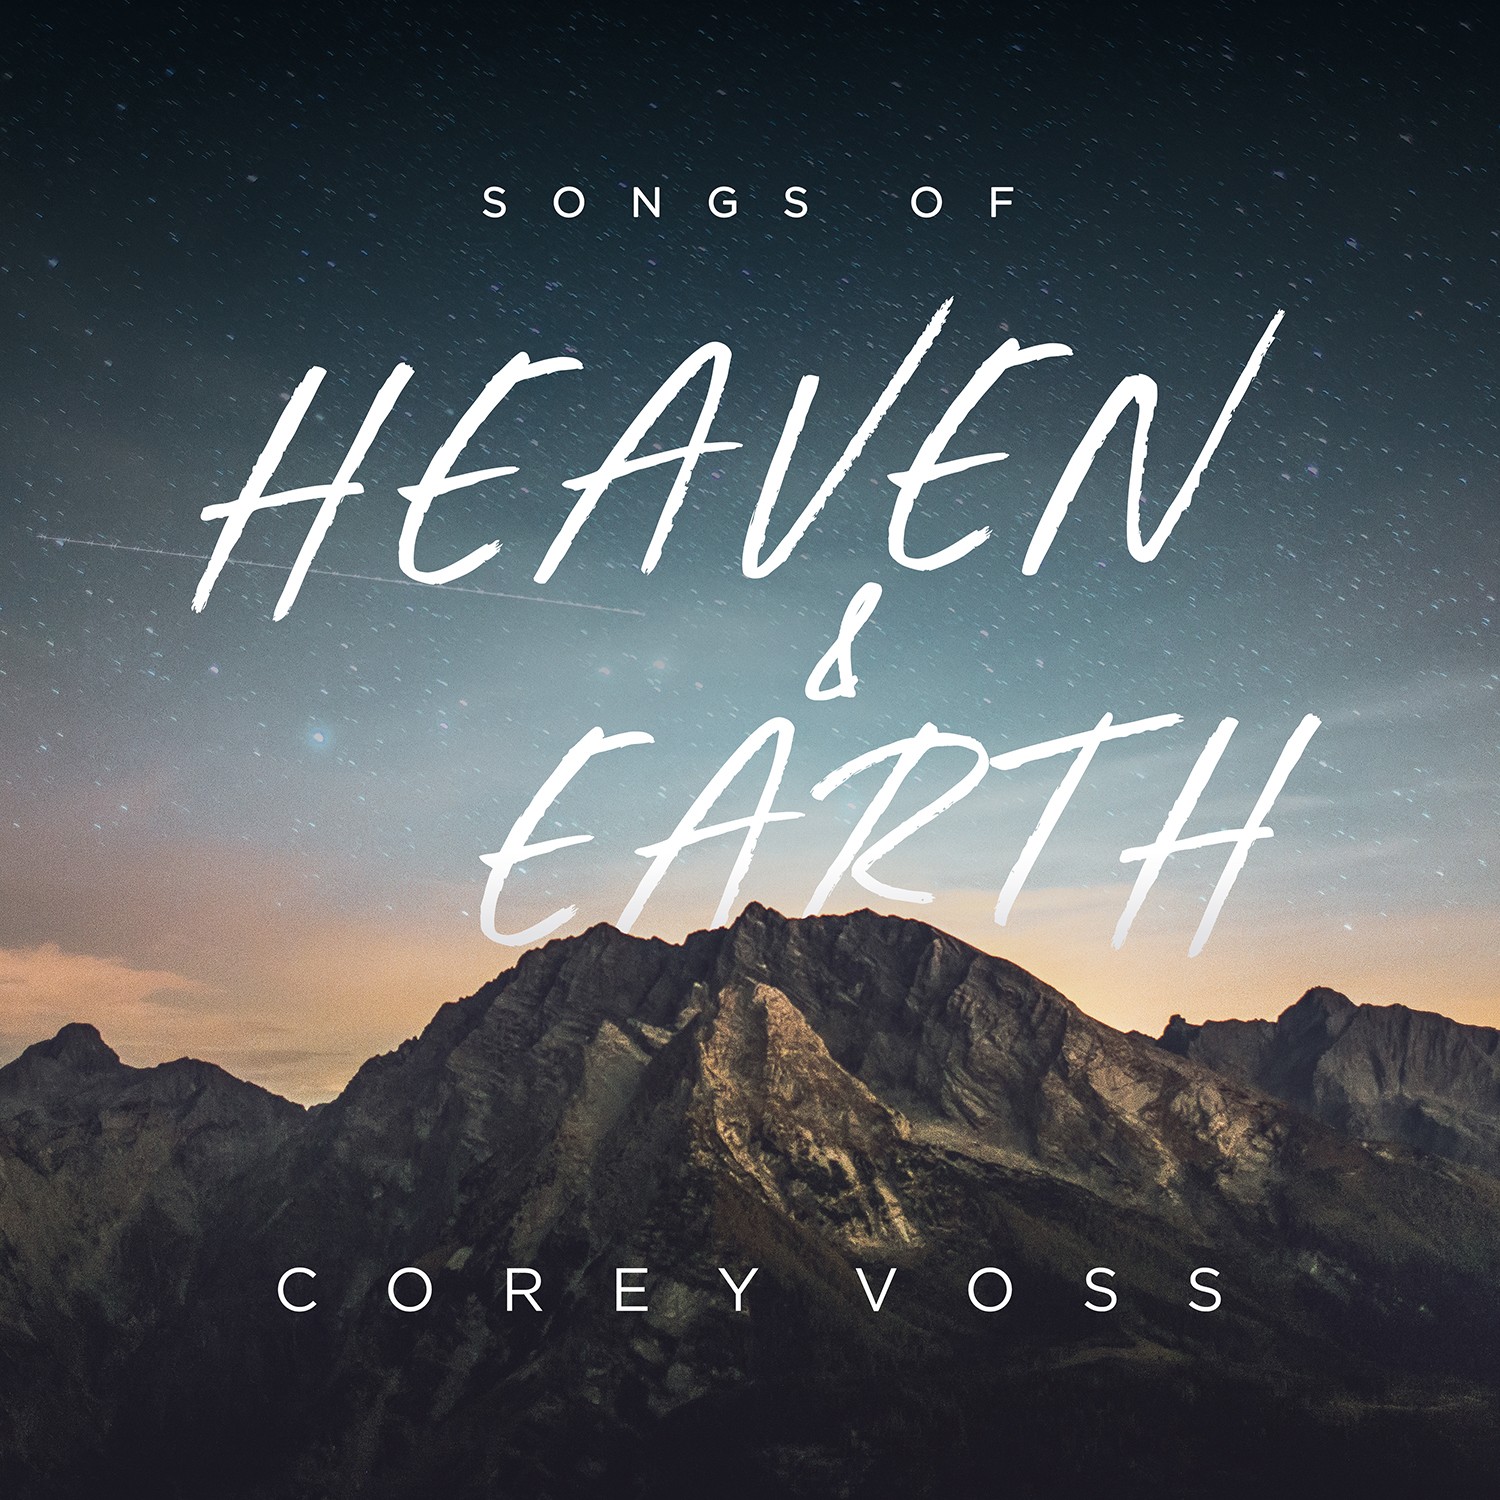 Songs of Heaven and Earth